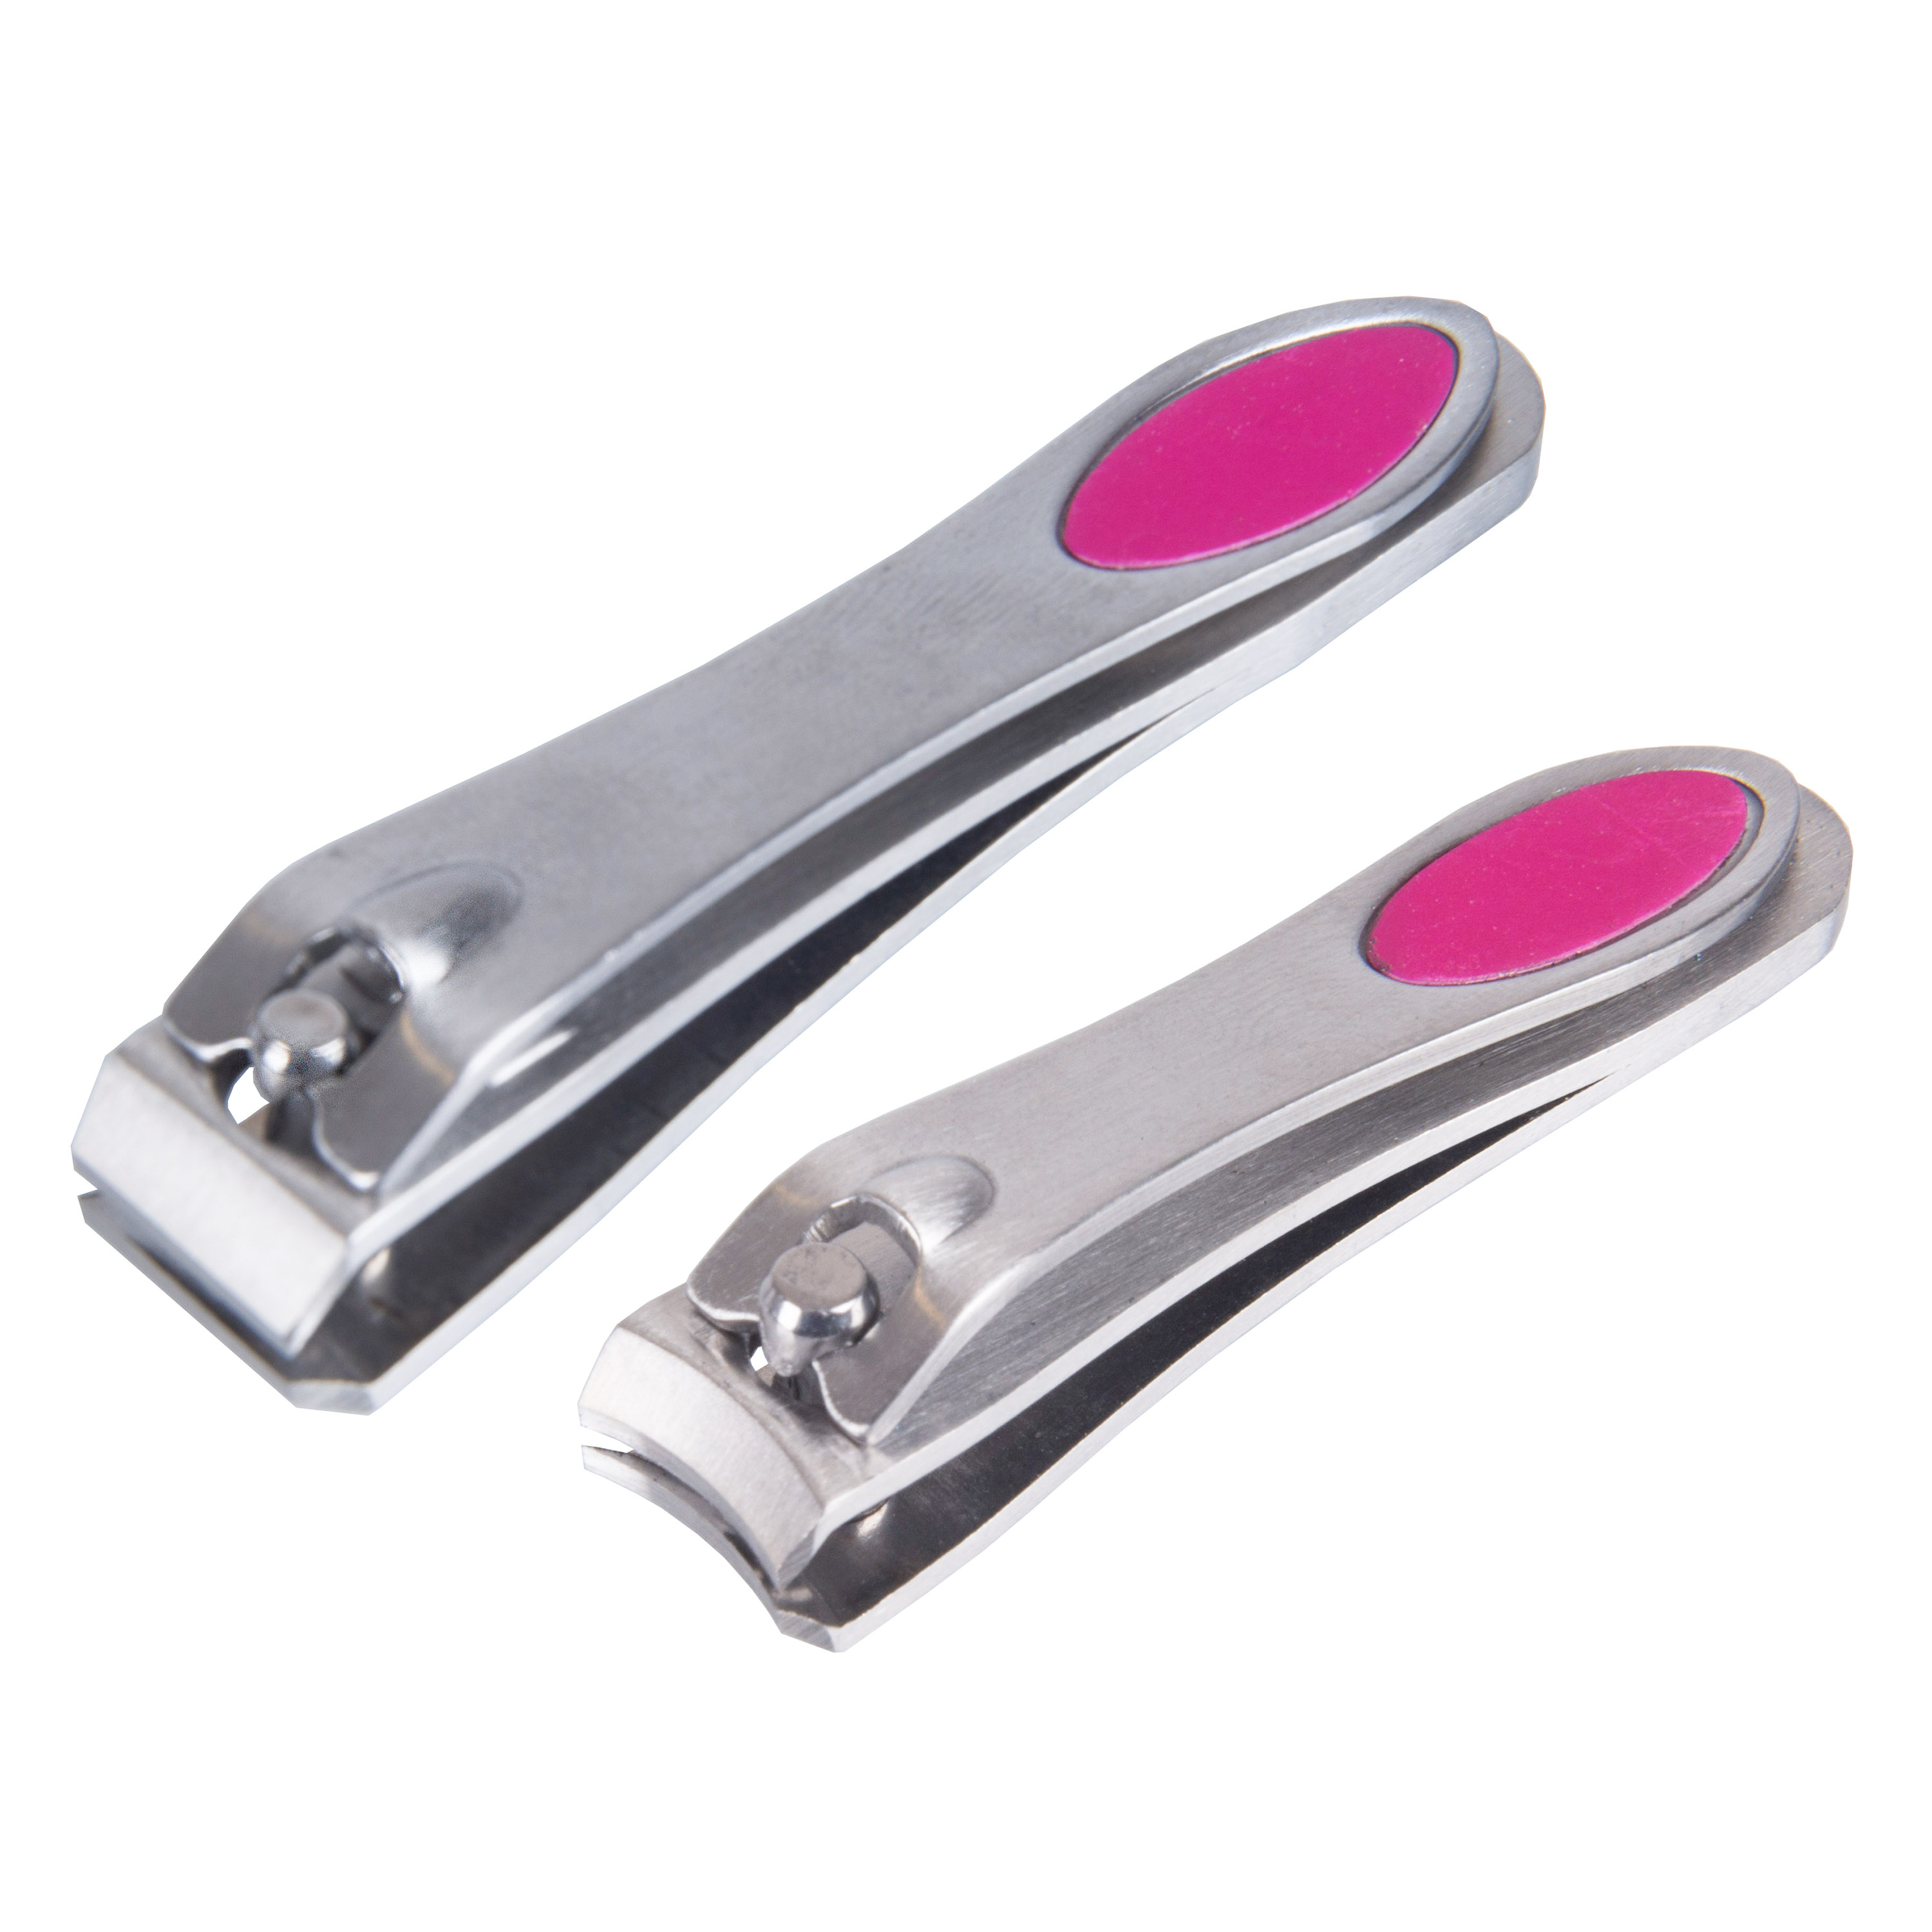 Trim Nail Care Stainless Steel Fingernail & Toenail Clippers, 2 Pieces - image 1 of 7